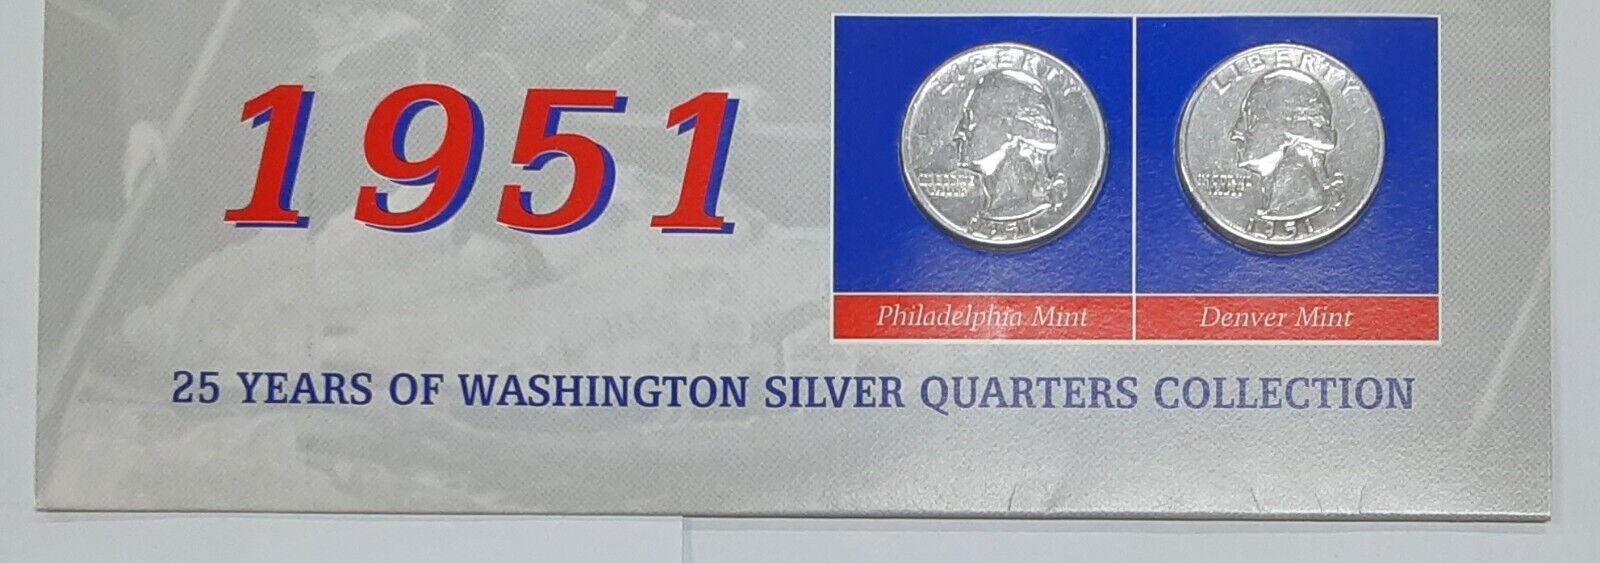 1951 Washington Crosses the Delaware Stamp & Silver Quarters Collection